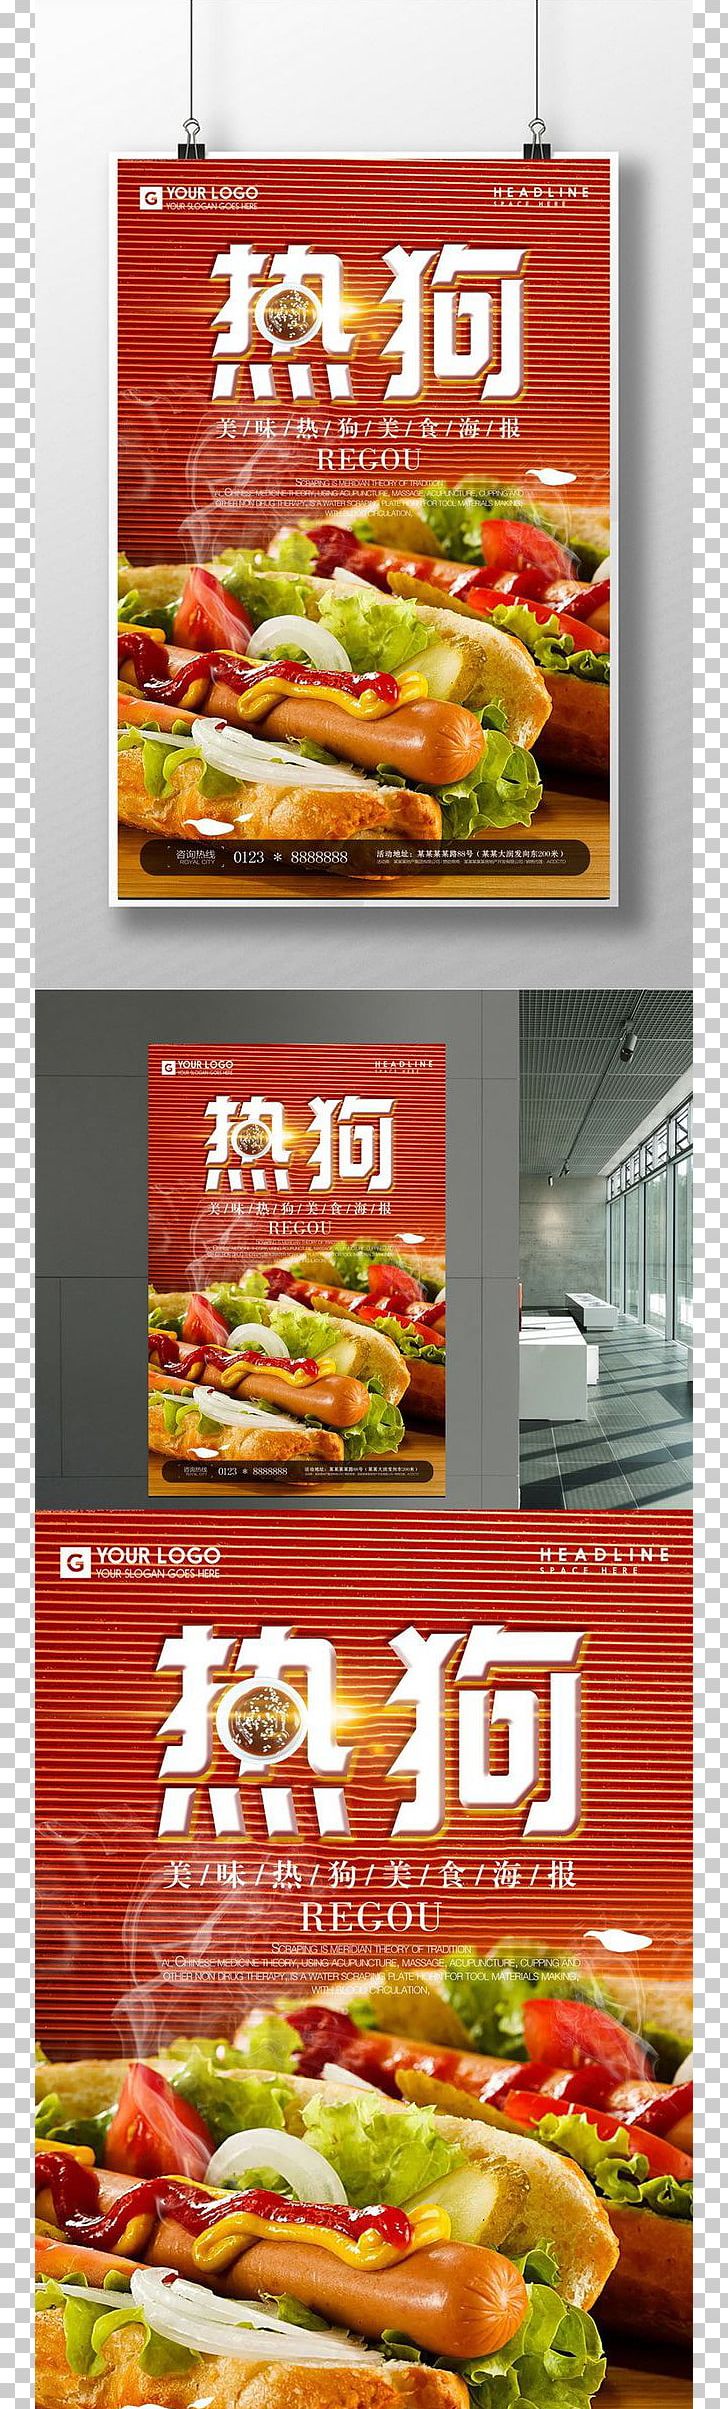 Hot Dog Stand Fast Food Restaurant Vegetarian Cuisine PNG, Clipart, Advertising, Convenience Food, Cuisine, Dish, Display Free PNG Download